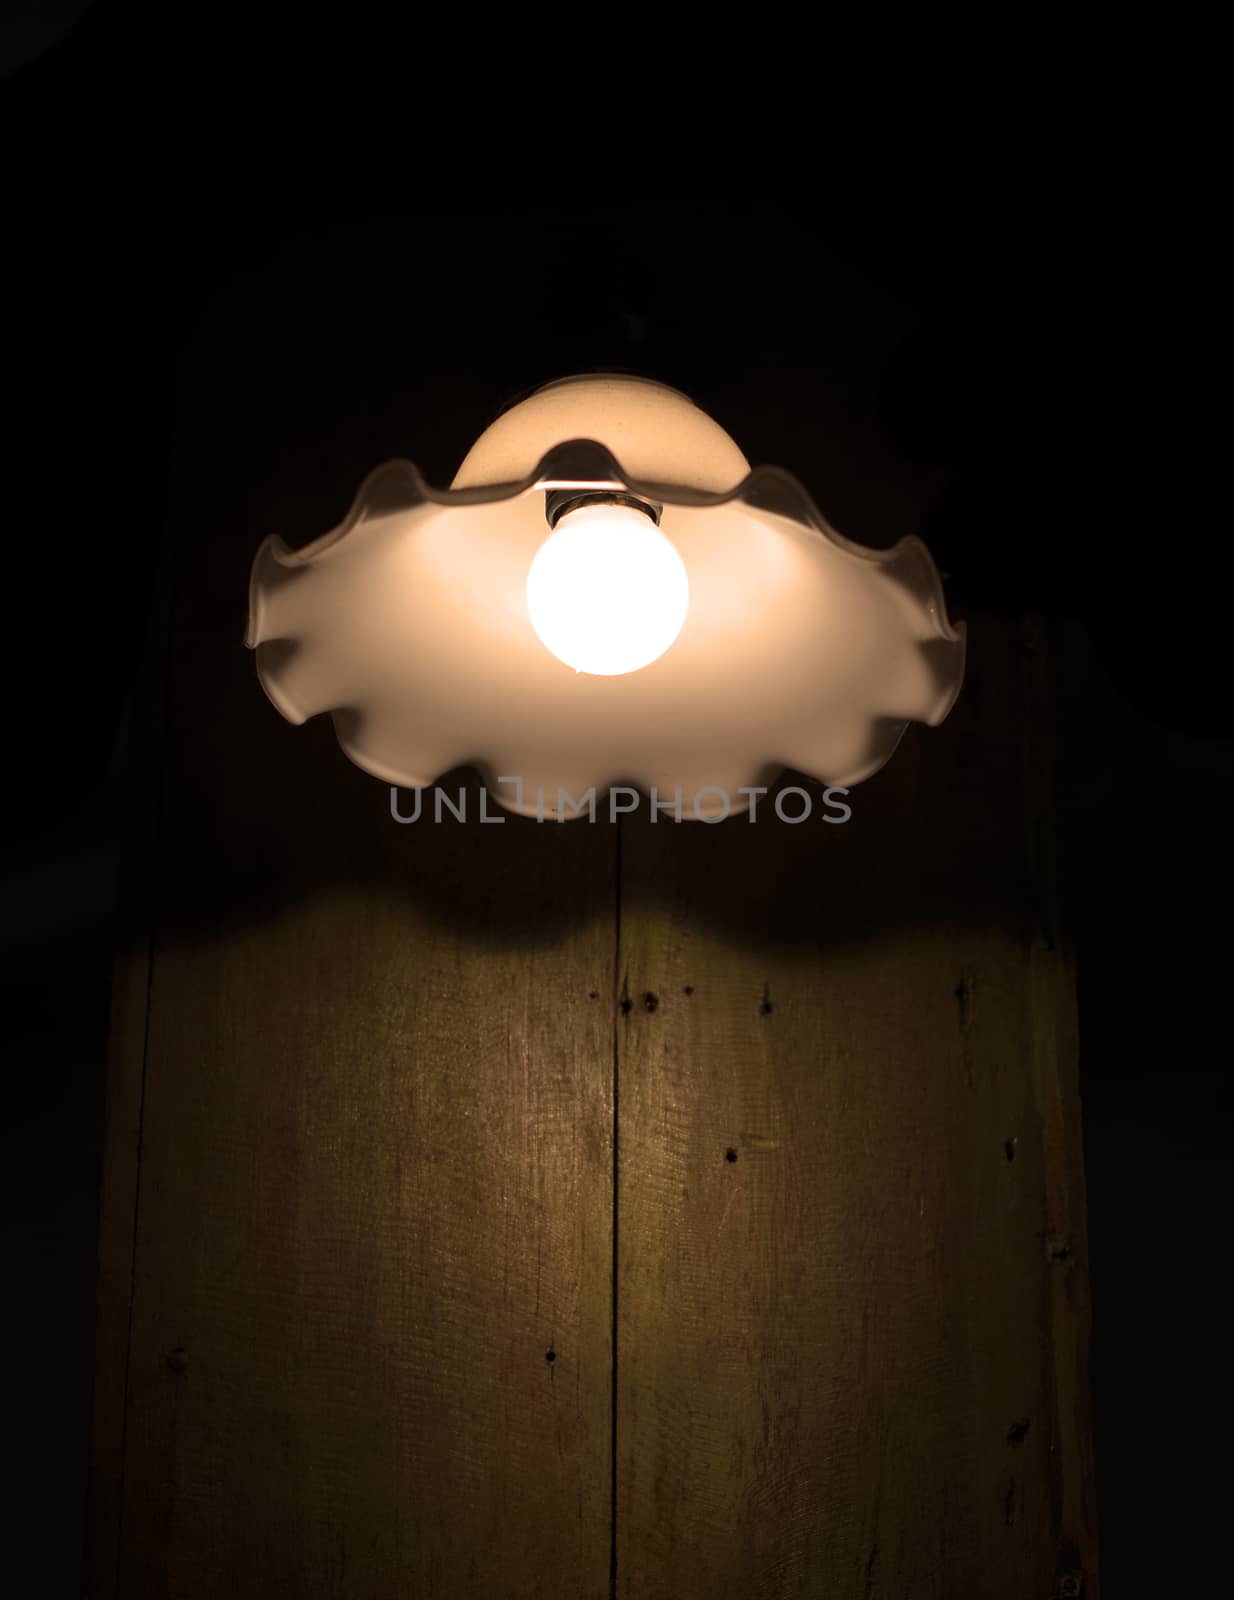 Lamp on a wall shining by sommai